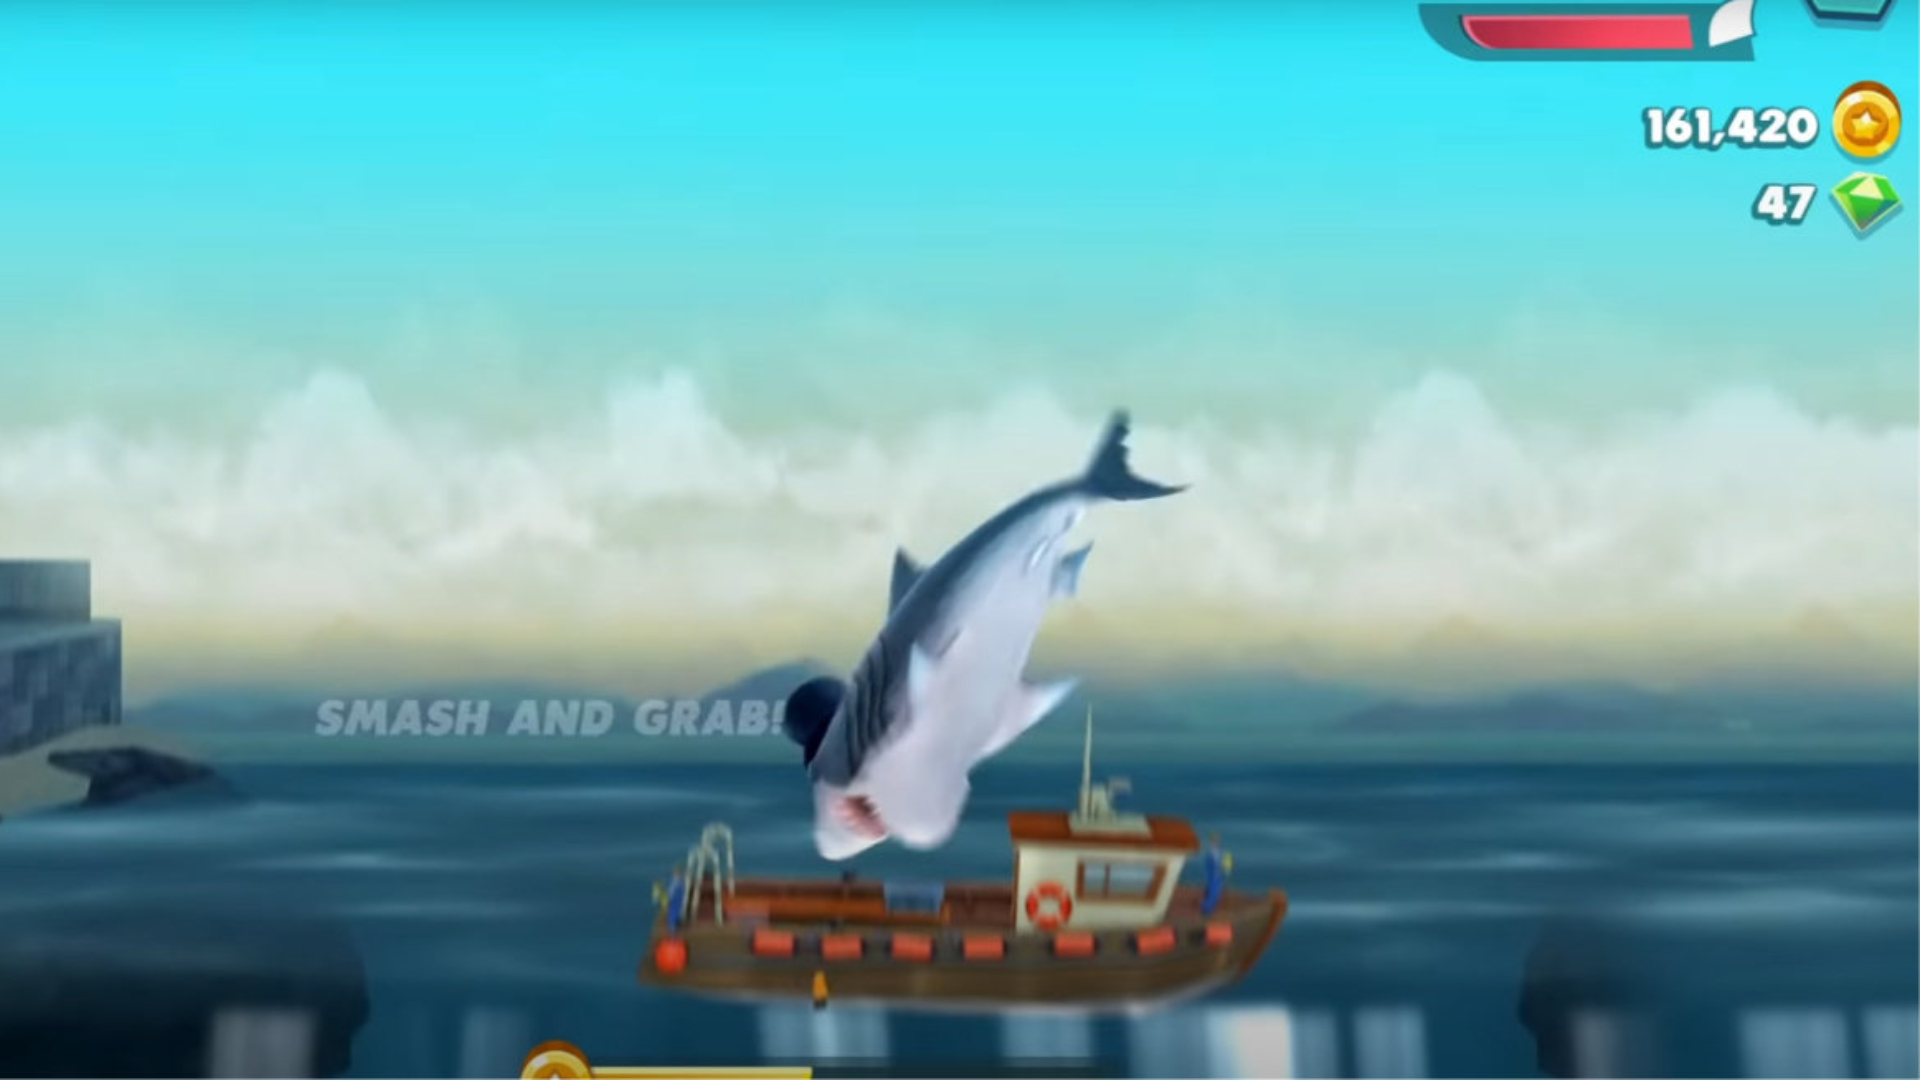 Have a jawsome time with the best shark games